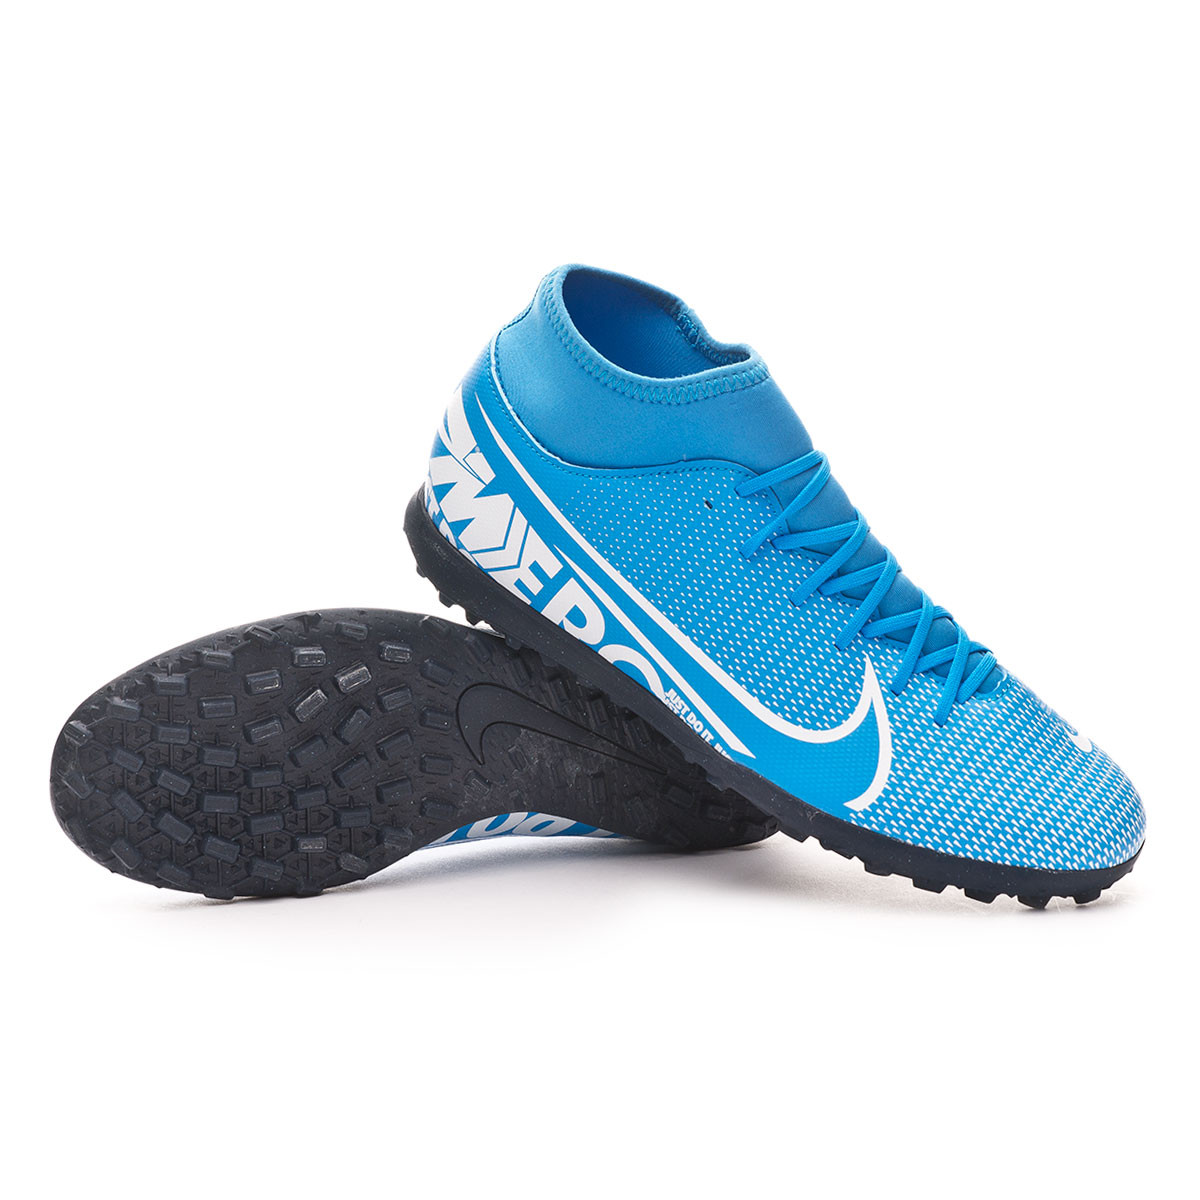 mercurial superfly academy df junior astro turf trainers